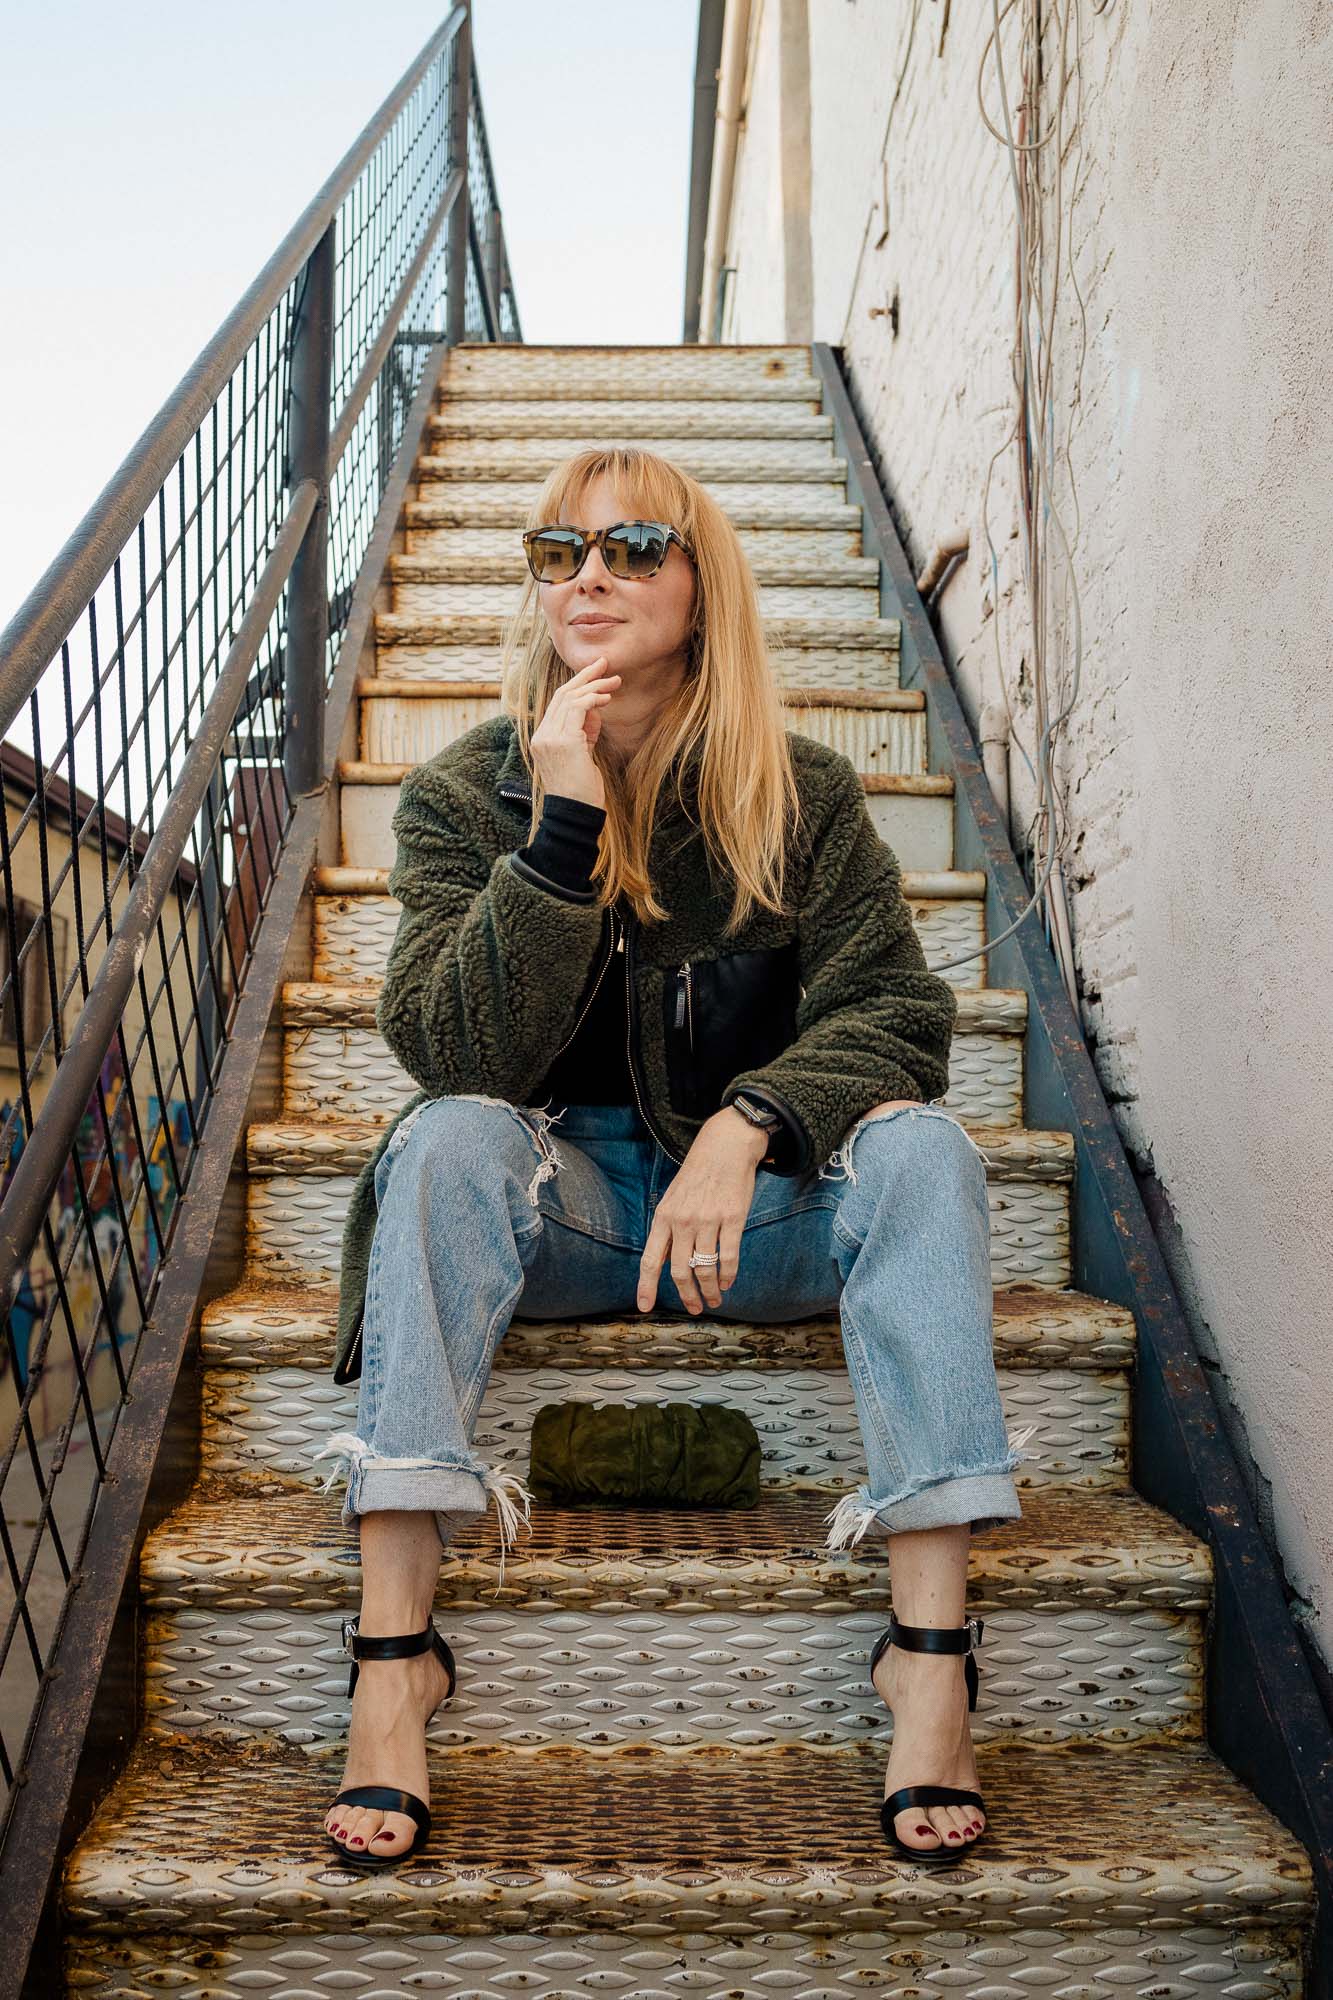 Sitting on steps wearing Staud black heels with Moussy Odessa jeans and the Anine Bing Ryder coat.